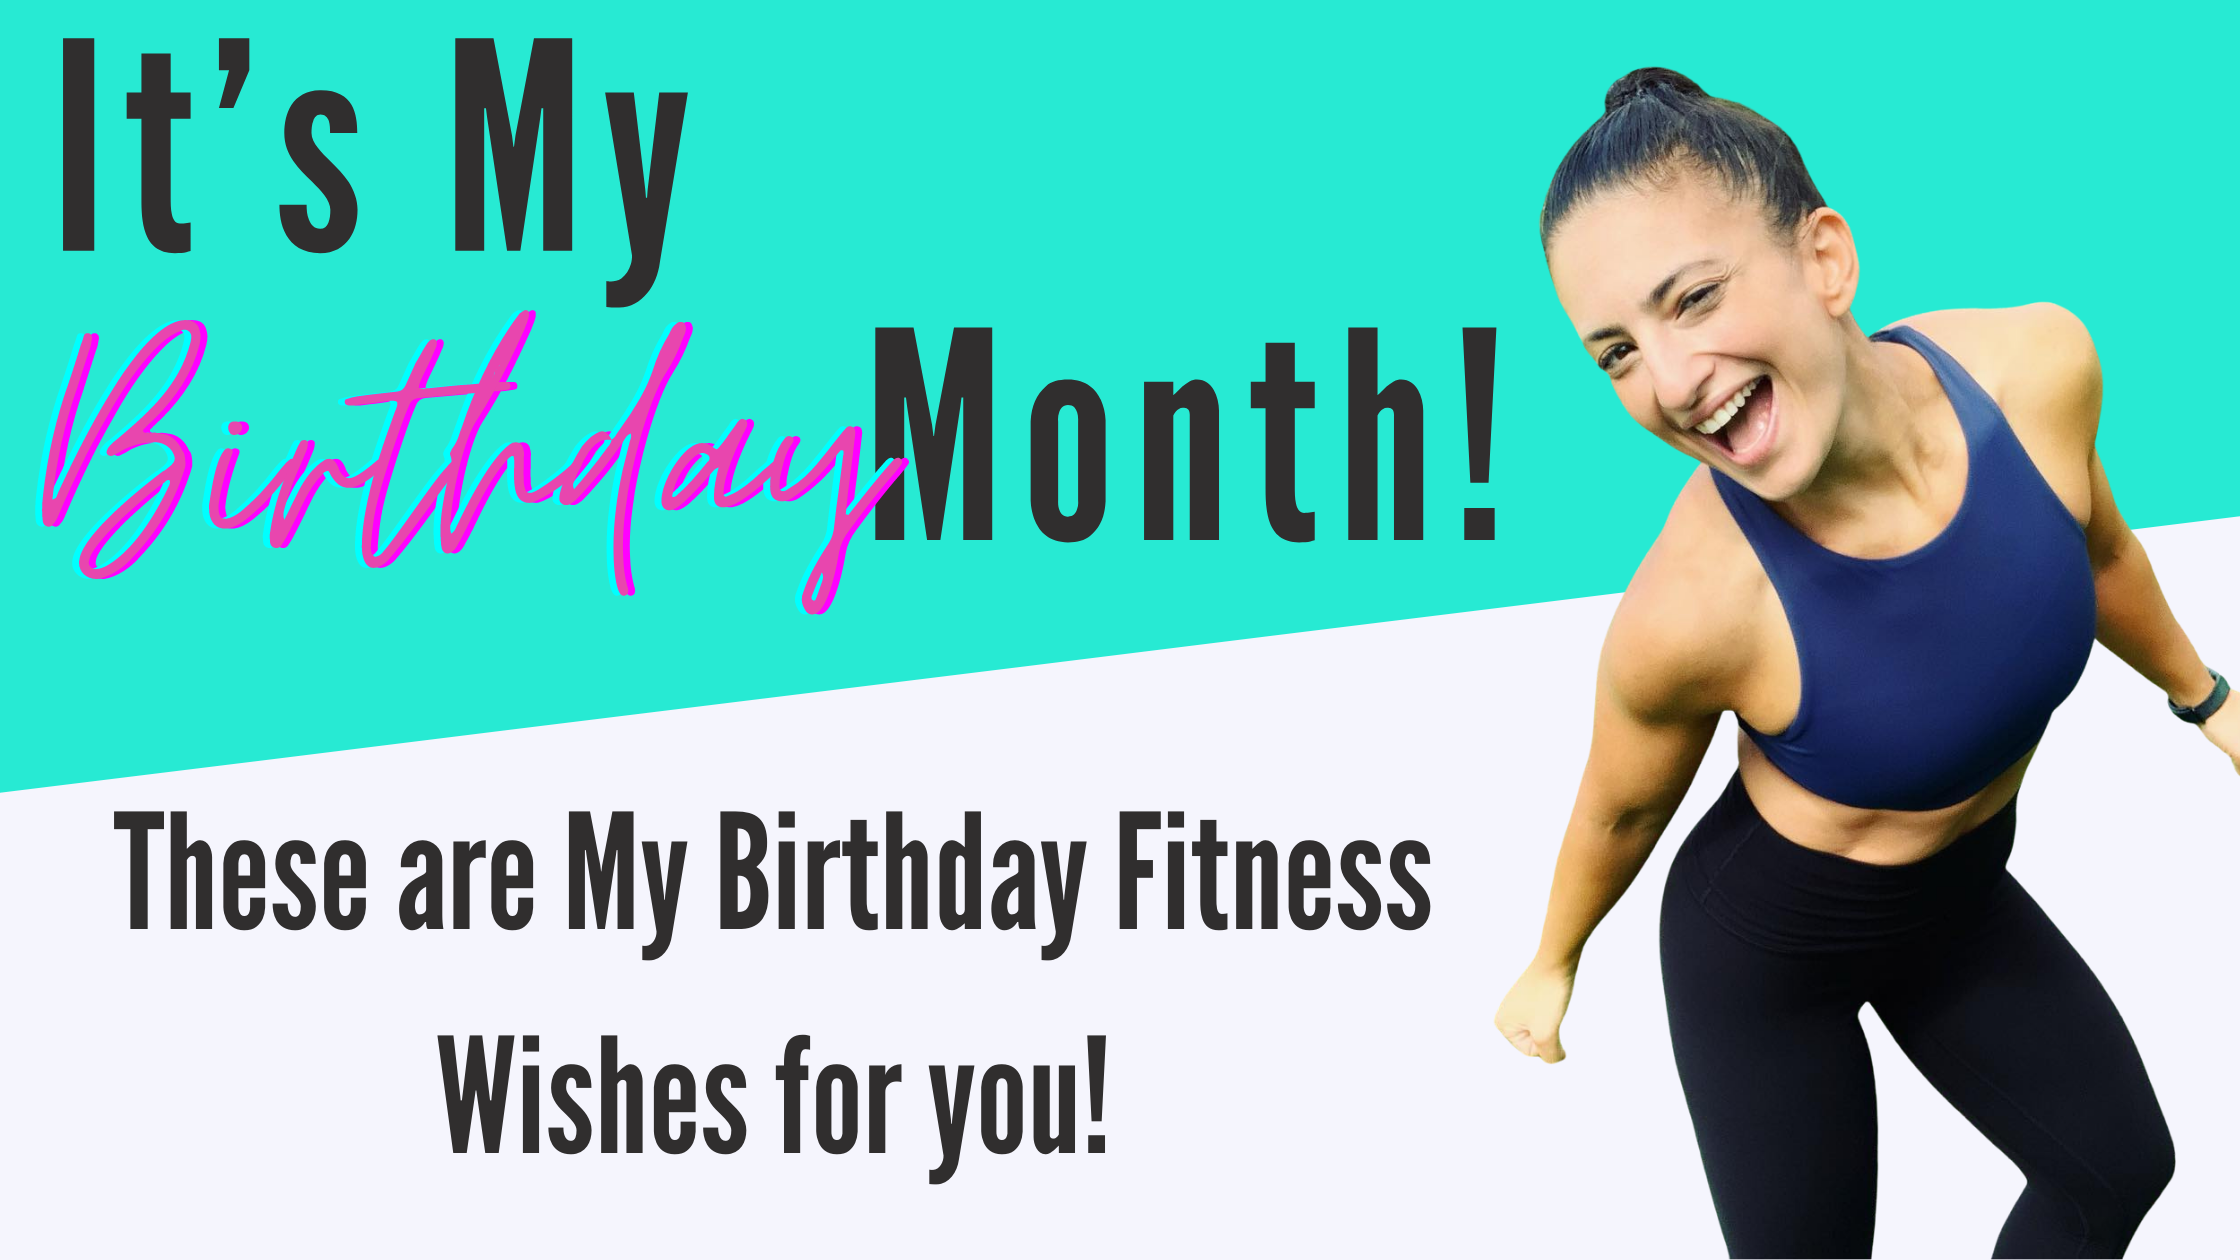 It’s My Birthday Month! These are My Birthday Fitness Wishes for you!